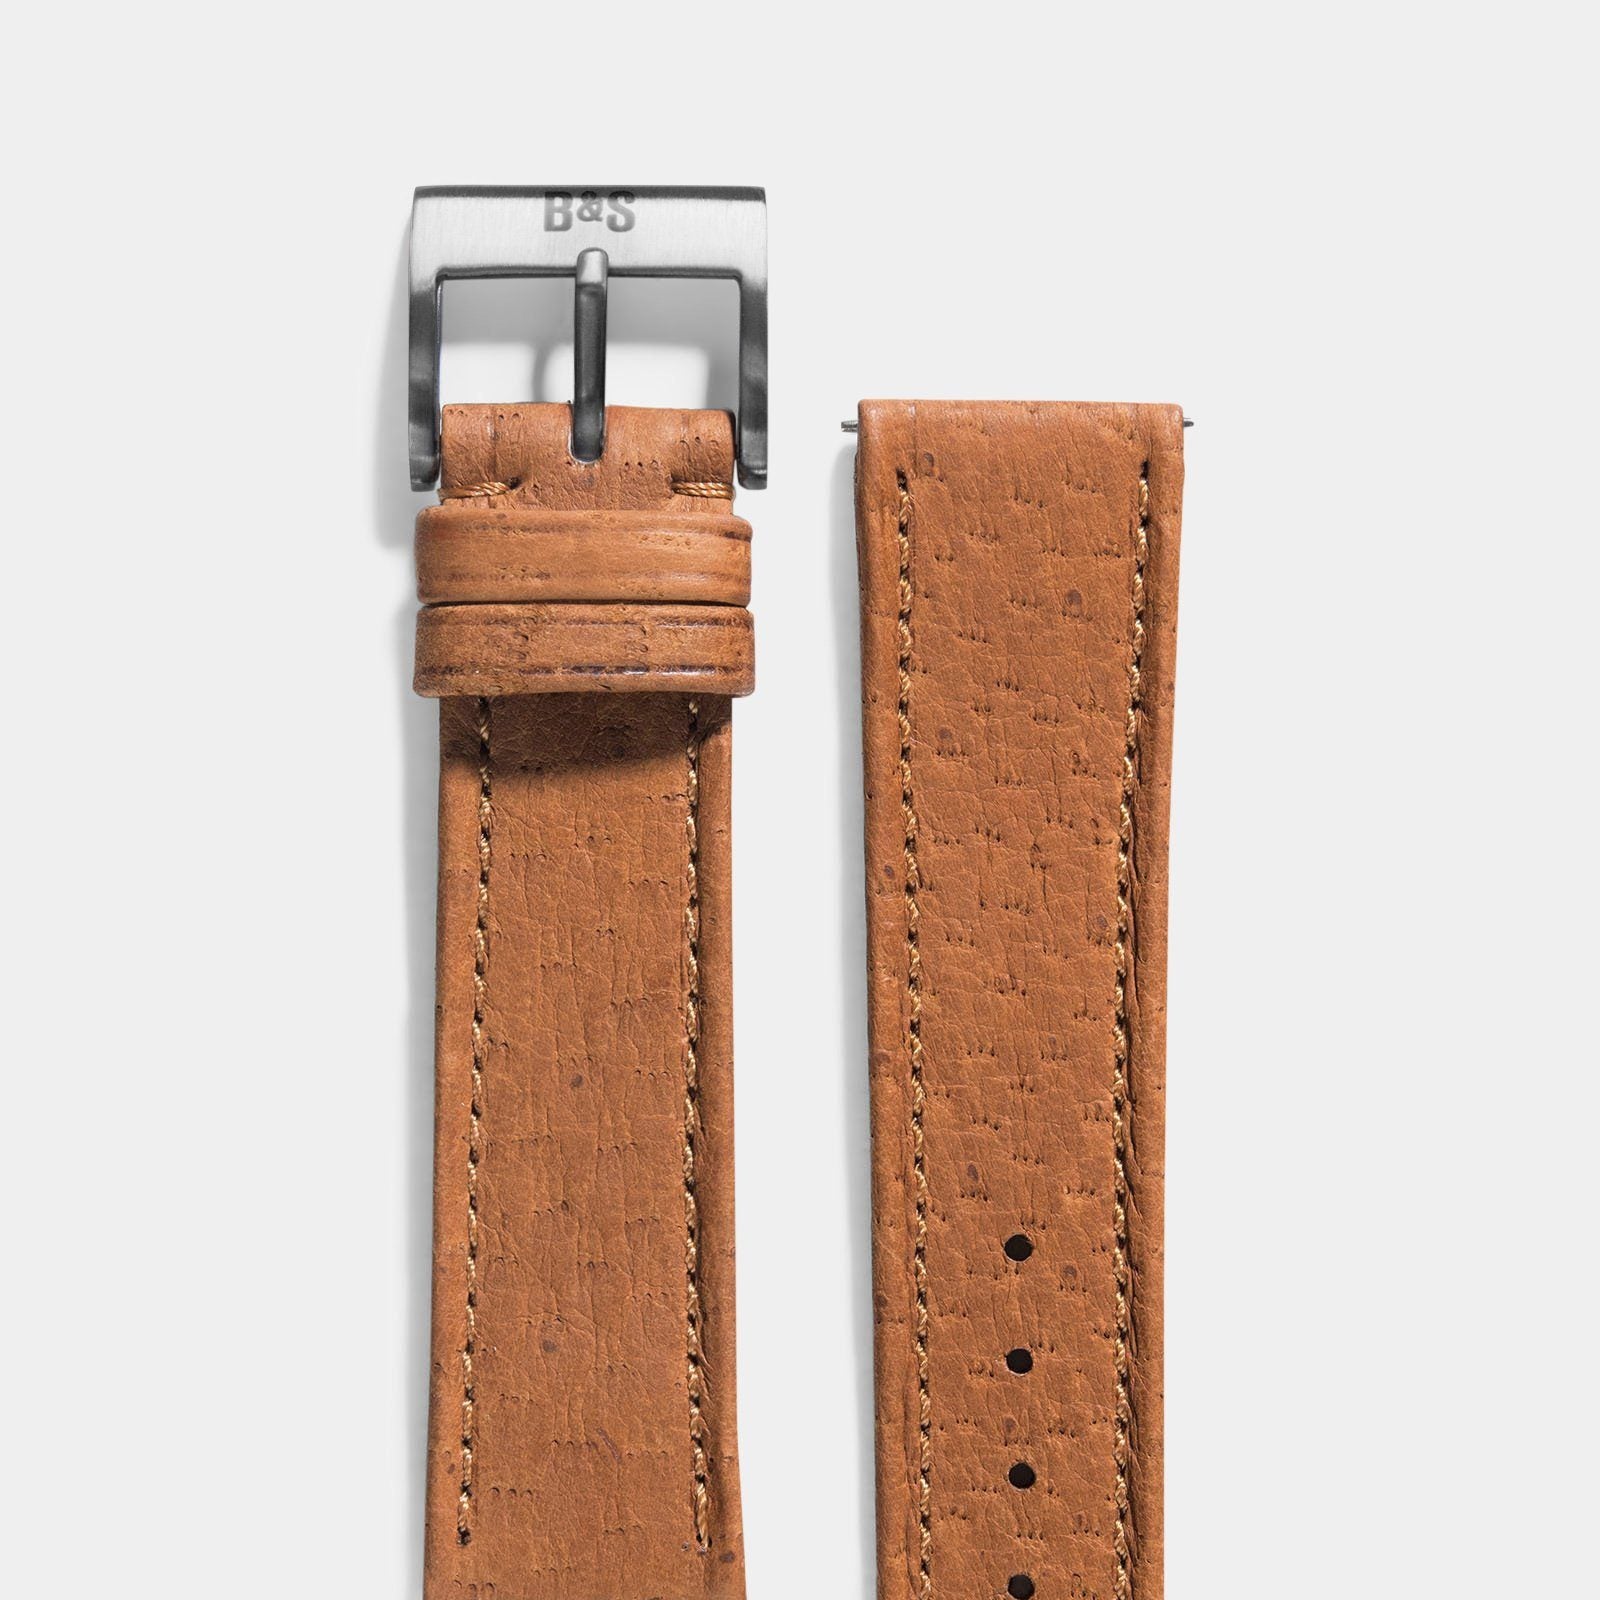 Straton Rapido Leather Straps (Price for Strap Only) 22mm Brown with Cream Stitching Rapido Leather Strap